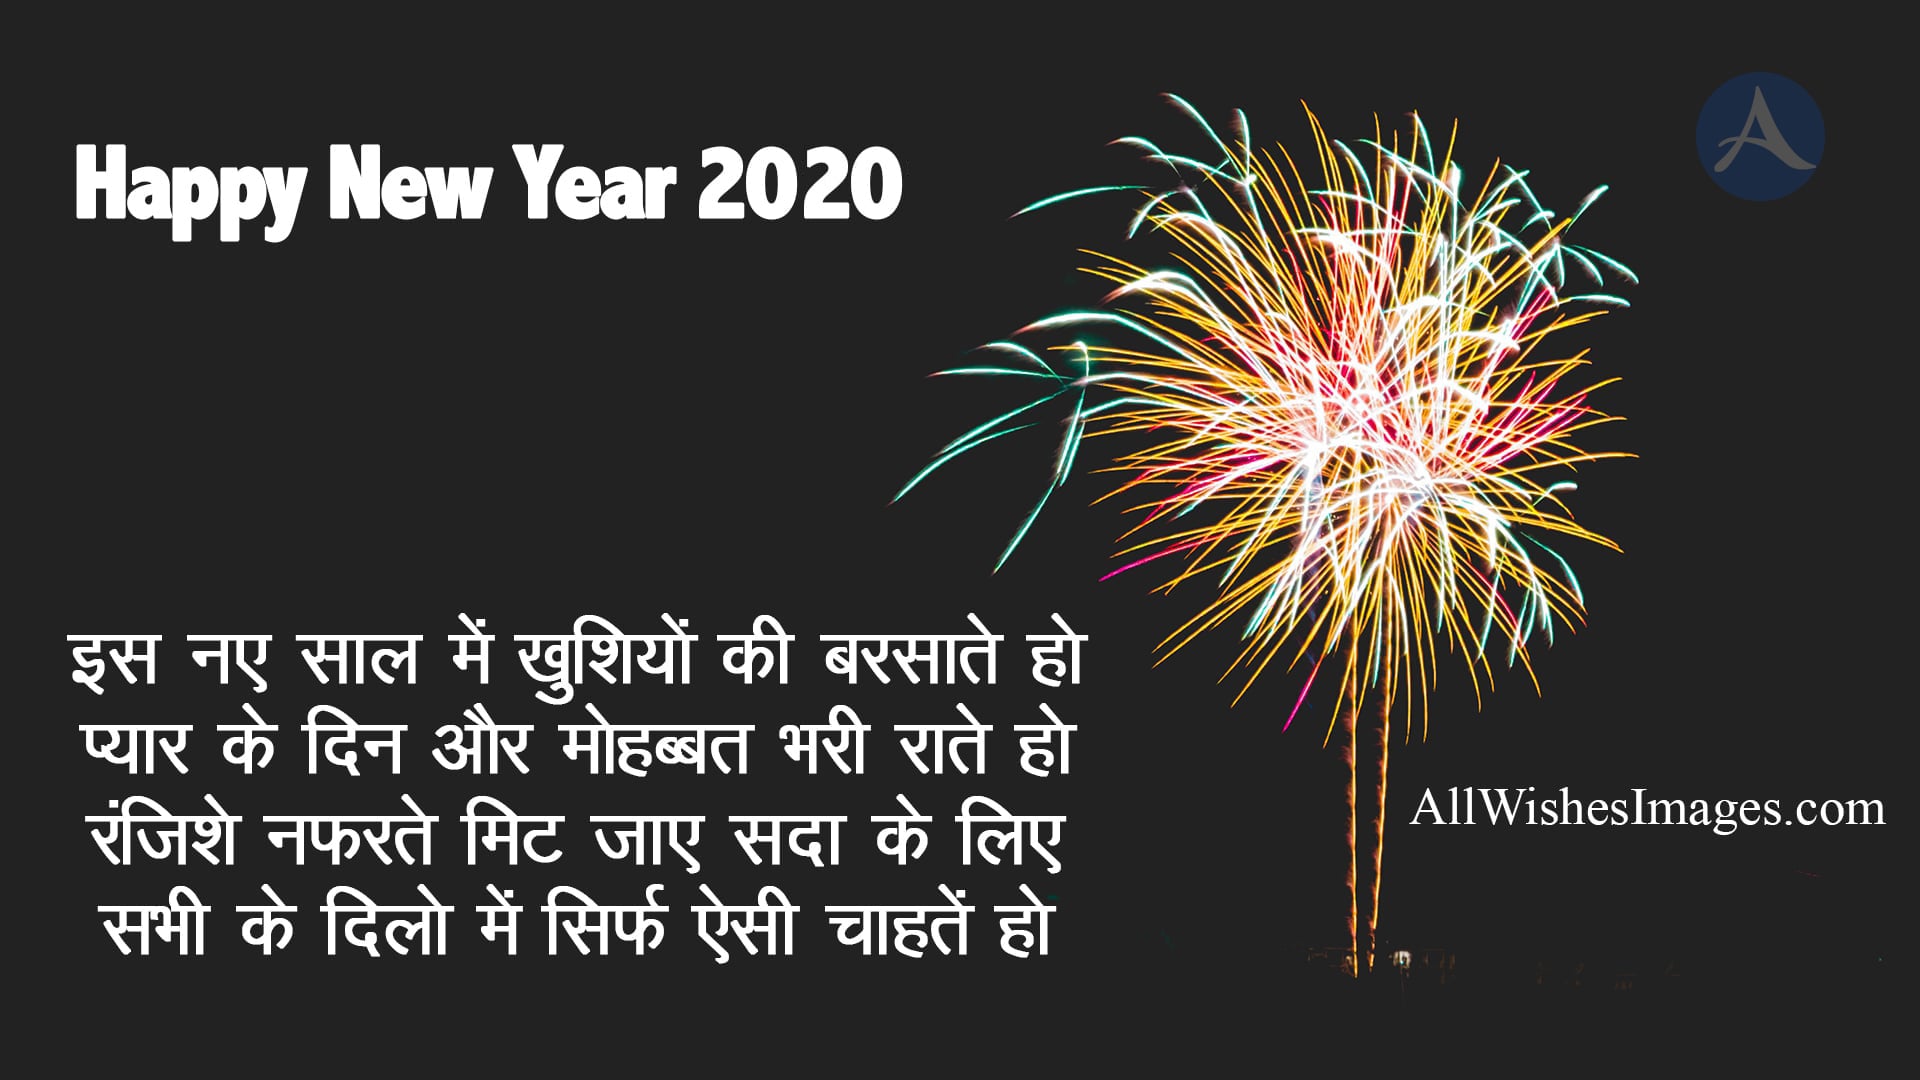 Happy New Year Hindi Shayari Images - All Wishes Images - Images for  WhatsApp